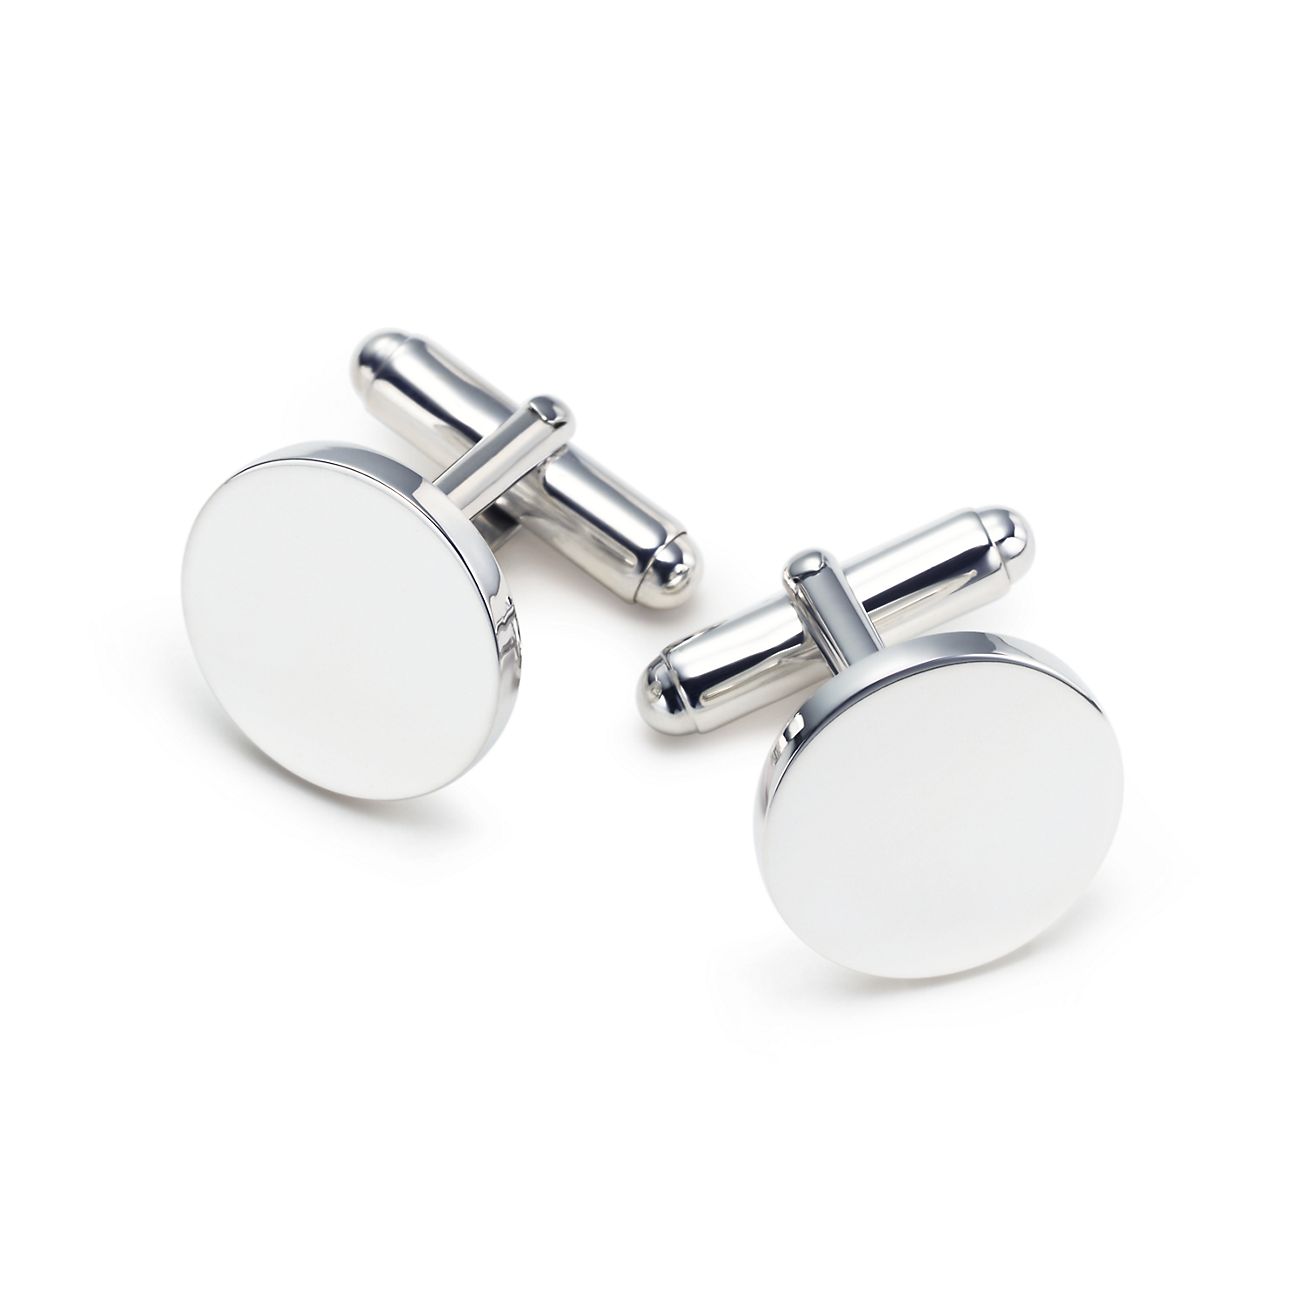 Round Cuff Links in Silver | Tiffany & Co.